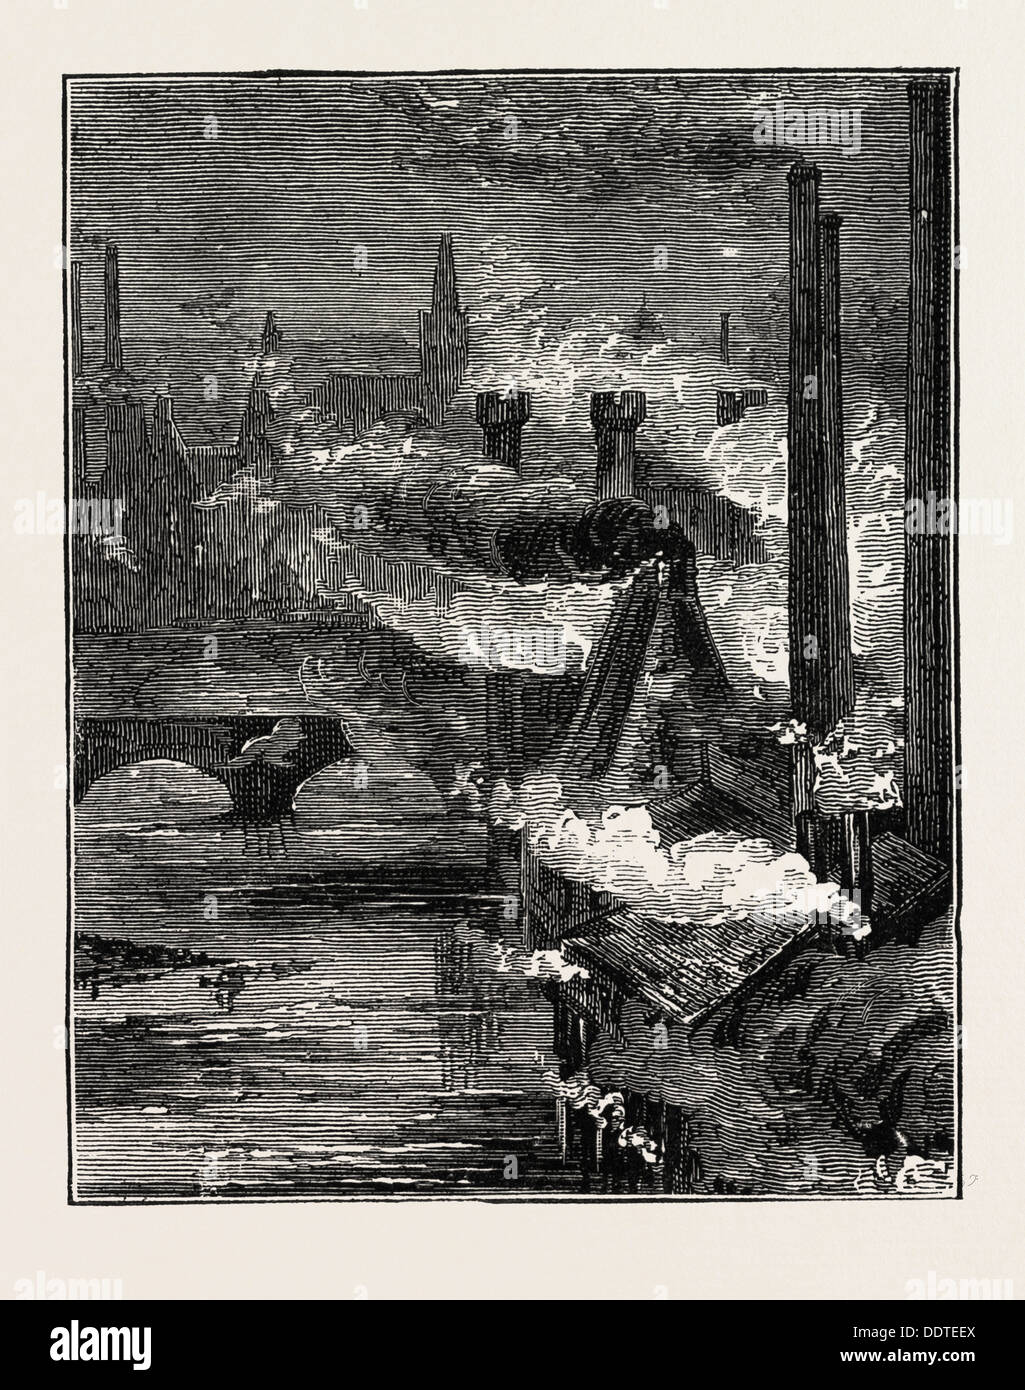 THE CLYDE STEEL AND IRON WORKS BY NIGHT, UK, 1873 engraving Stock Photo